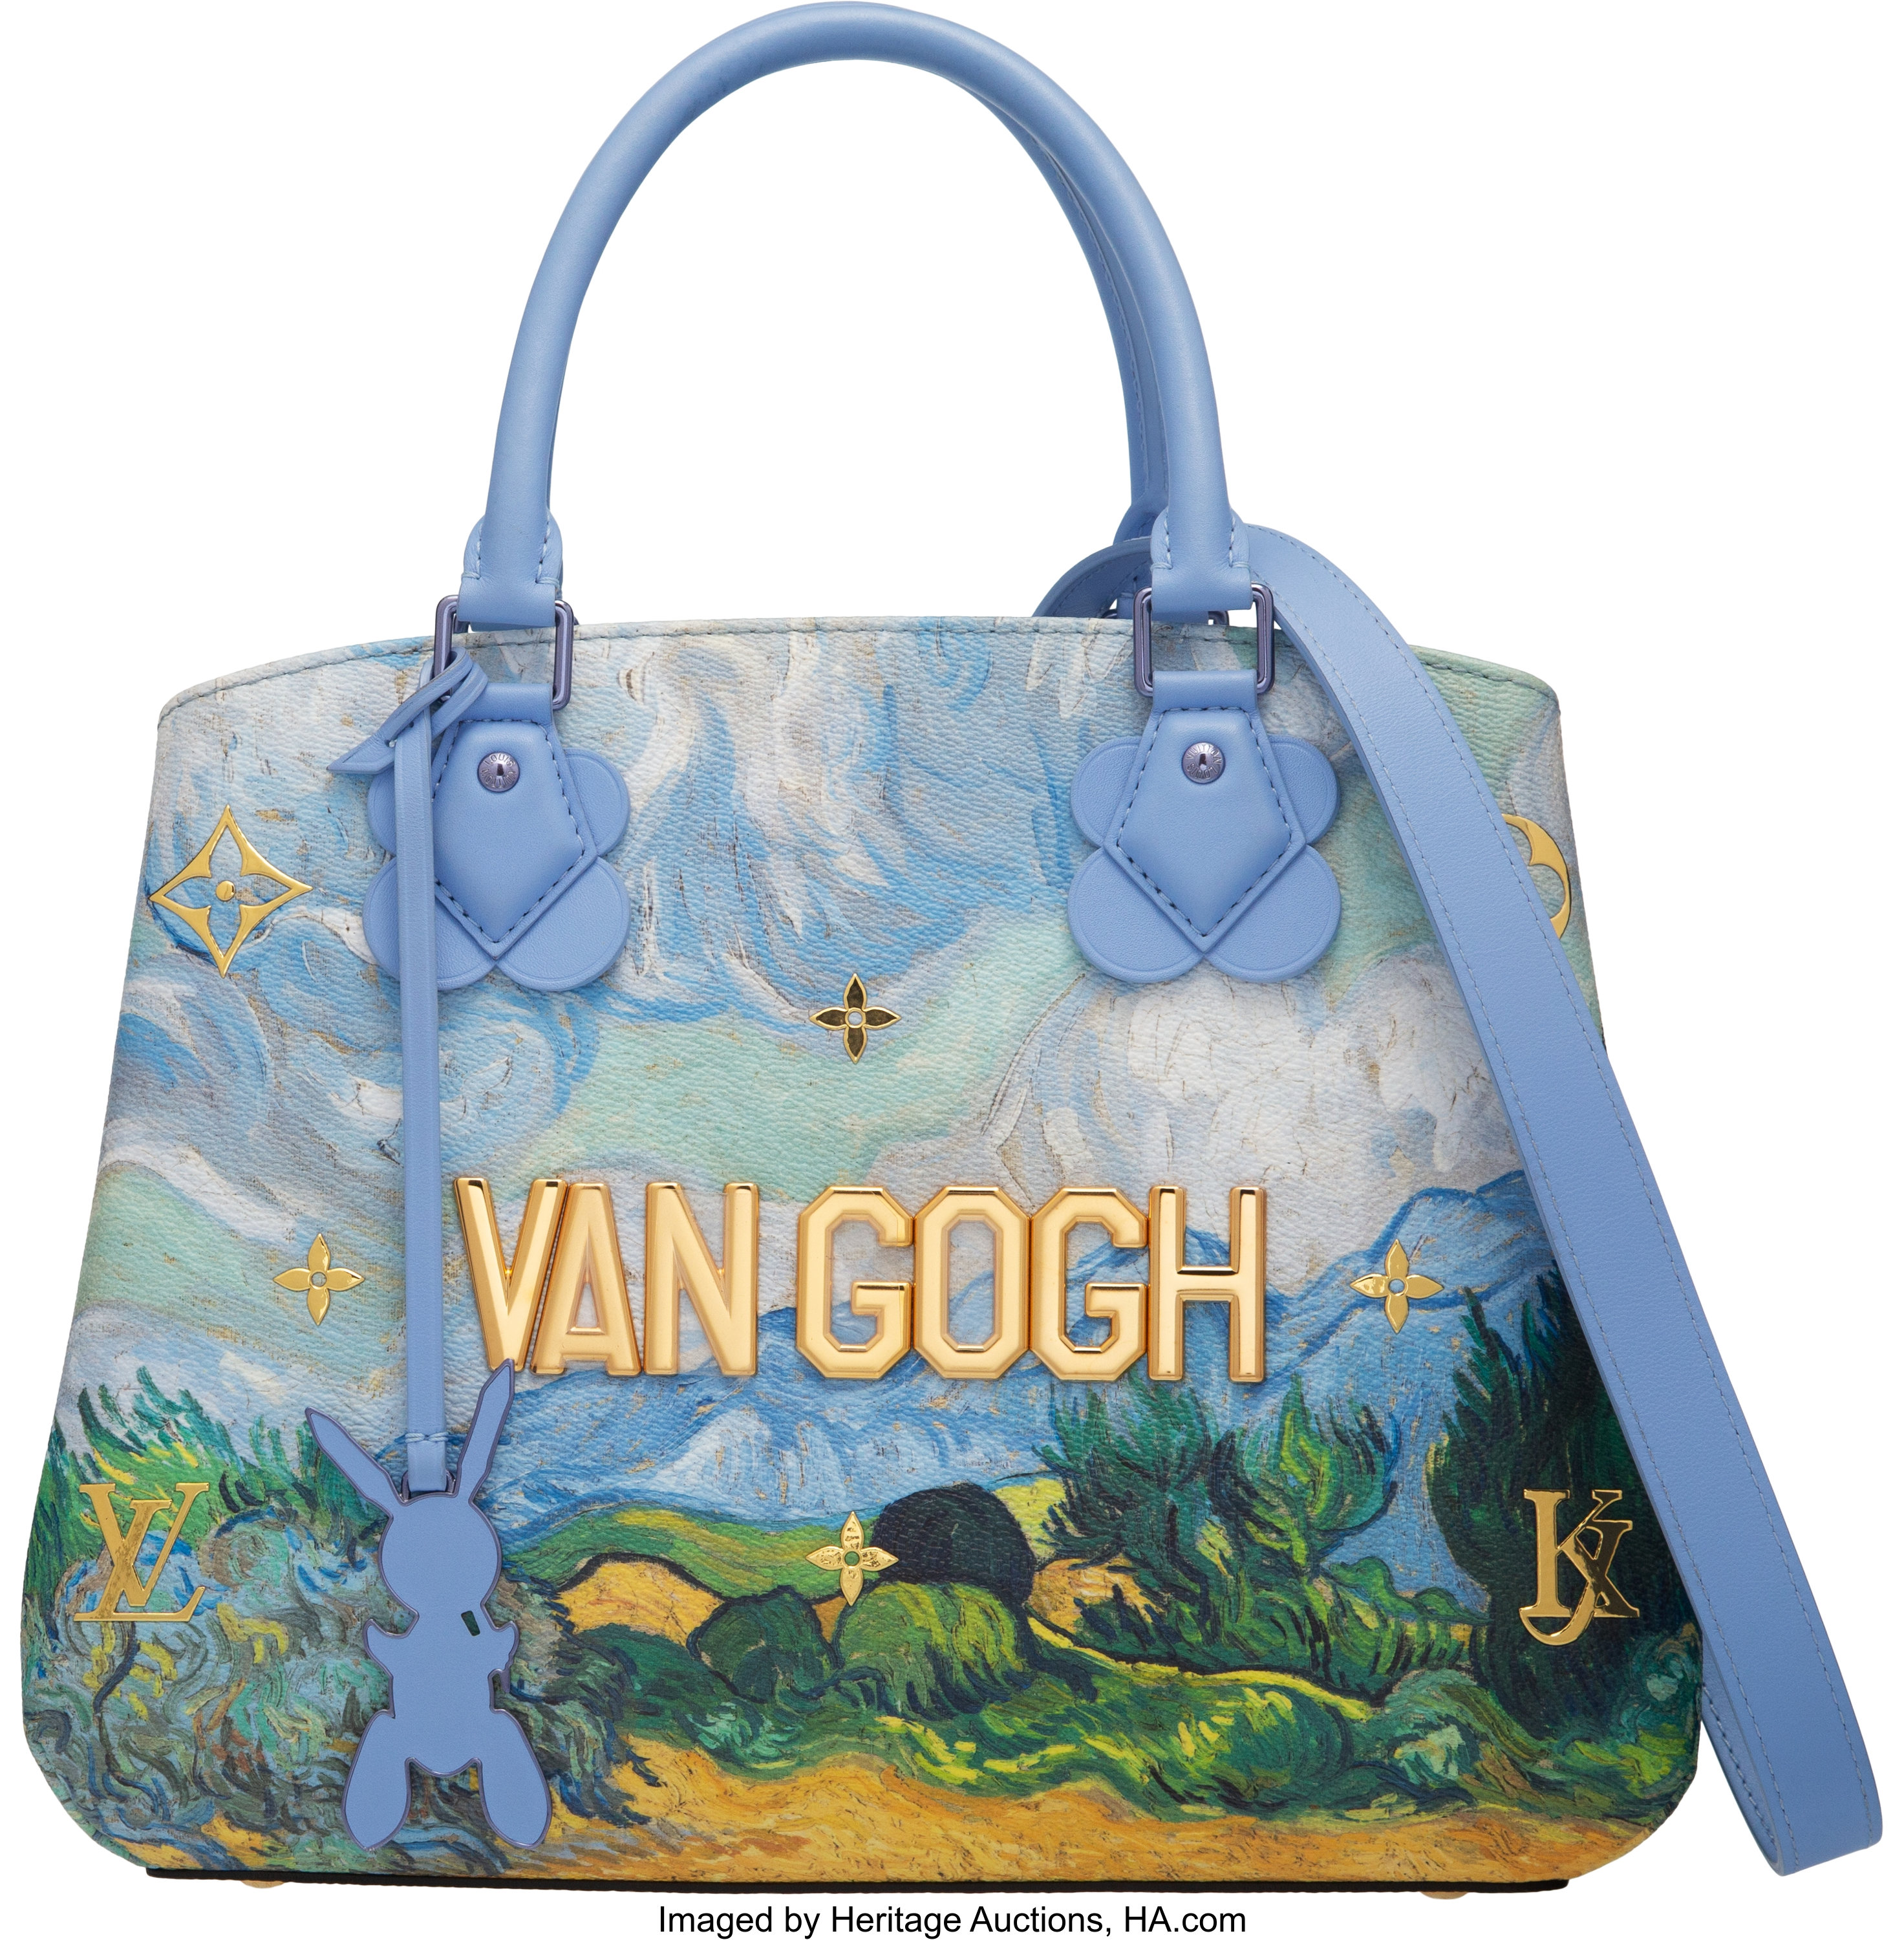 Louis Vuitton x Jeff Koons Limited Edition Periwinkle Leather